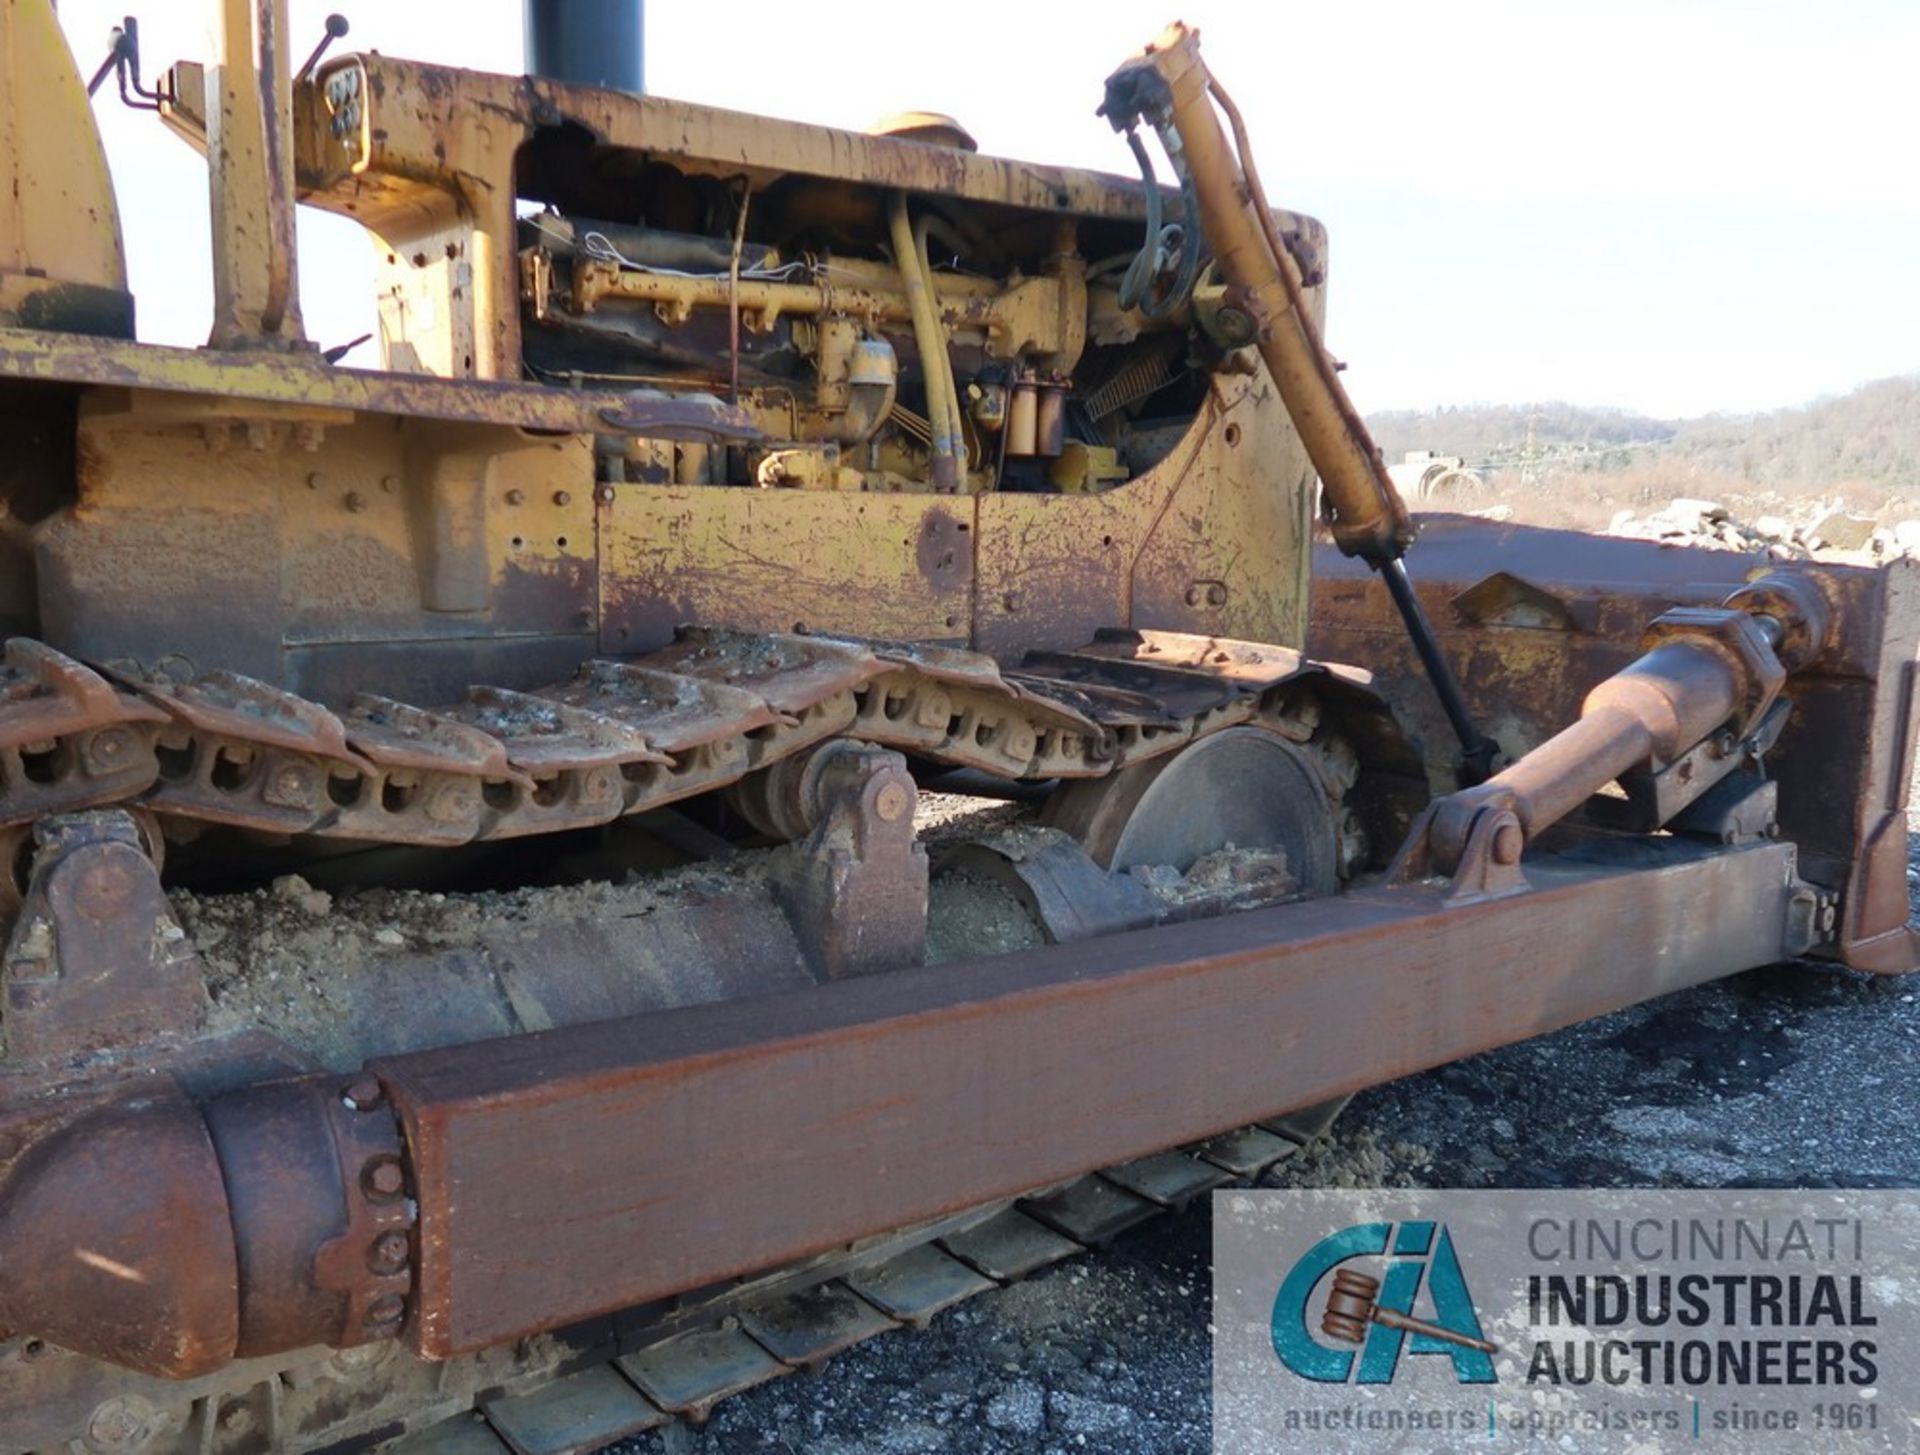 CATERPILLAR MODEL D8H CRAWLER DOZIER; S/N 46A28203 (NEW 1973), 53" X 148" BLADE, 24" TRACKS, HOURS - Image 6 of 18